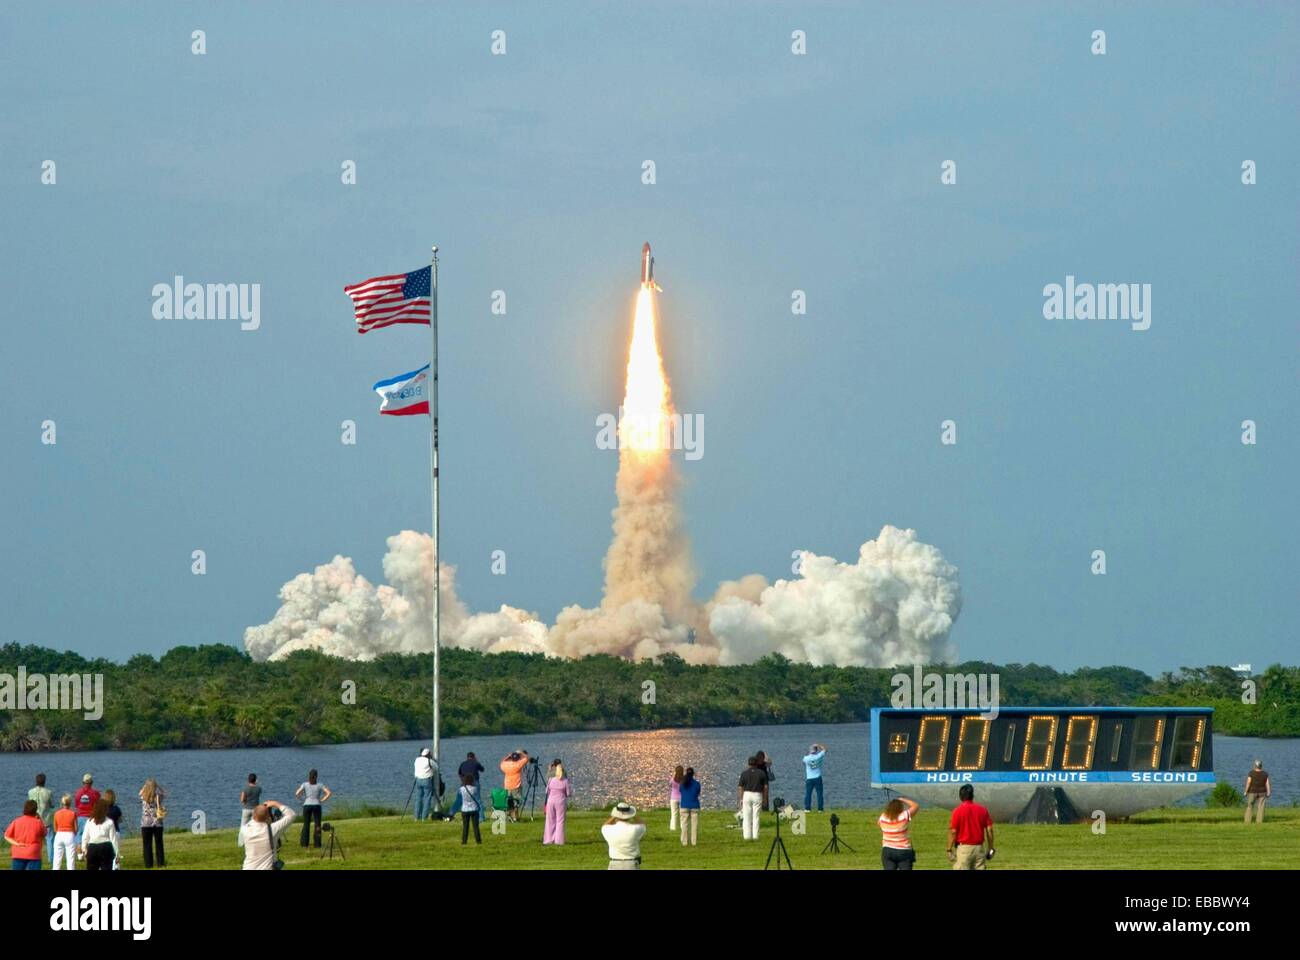 Endeavour Lifts Off  Under a cloud-washed sky, spectators watch as space shuttle Endeavour rises majestically from Launch Pad Stock Photo